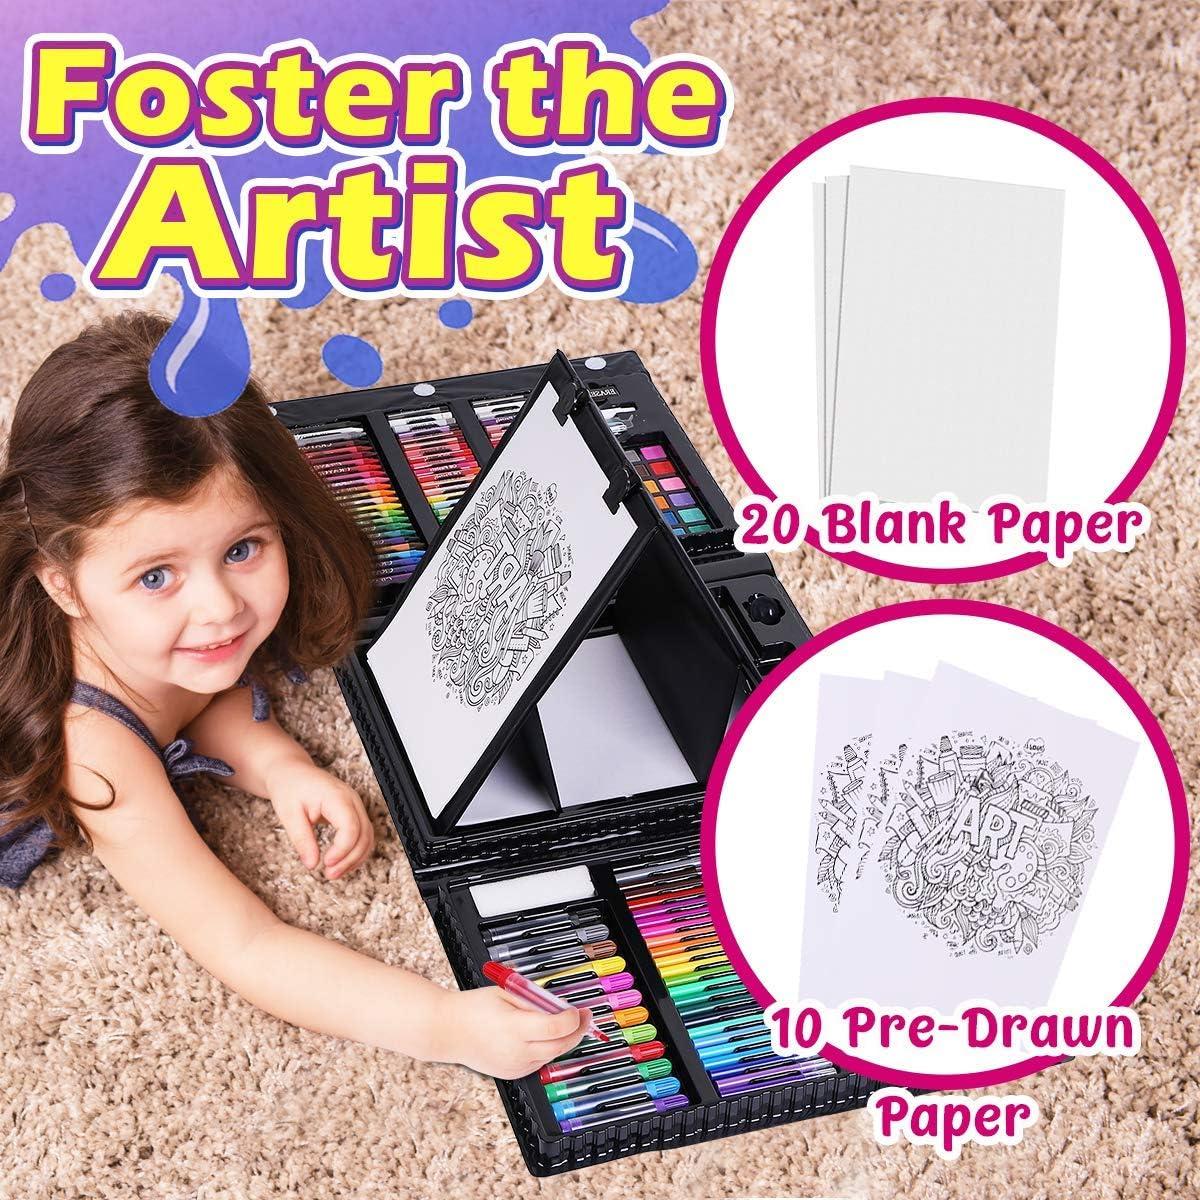 Drawing Paper for Boys Ages 4 - 8 with Blank Pad to Draw on